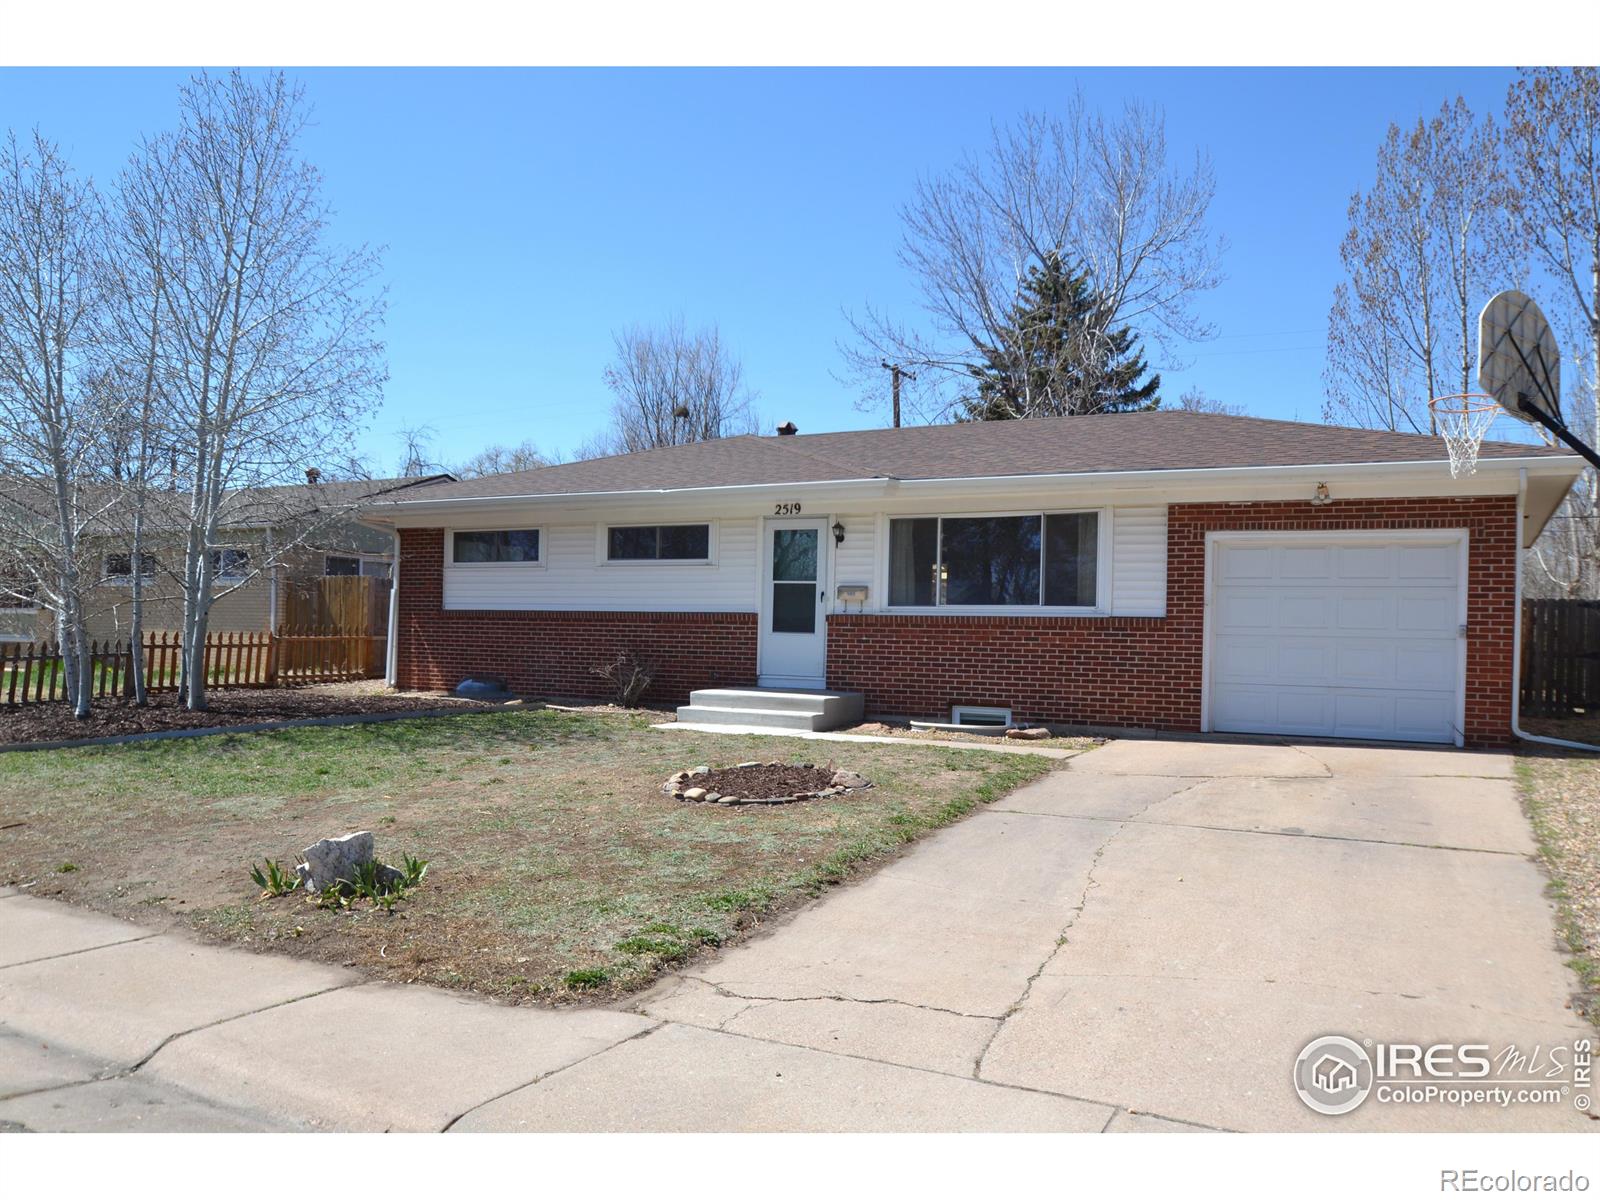 2519  14th Avenue, greeley MLS: 4567891006748 Beds: 4 Baths: 2 Price: $349,900